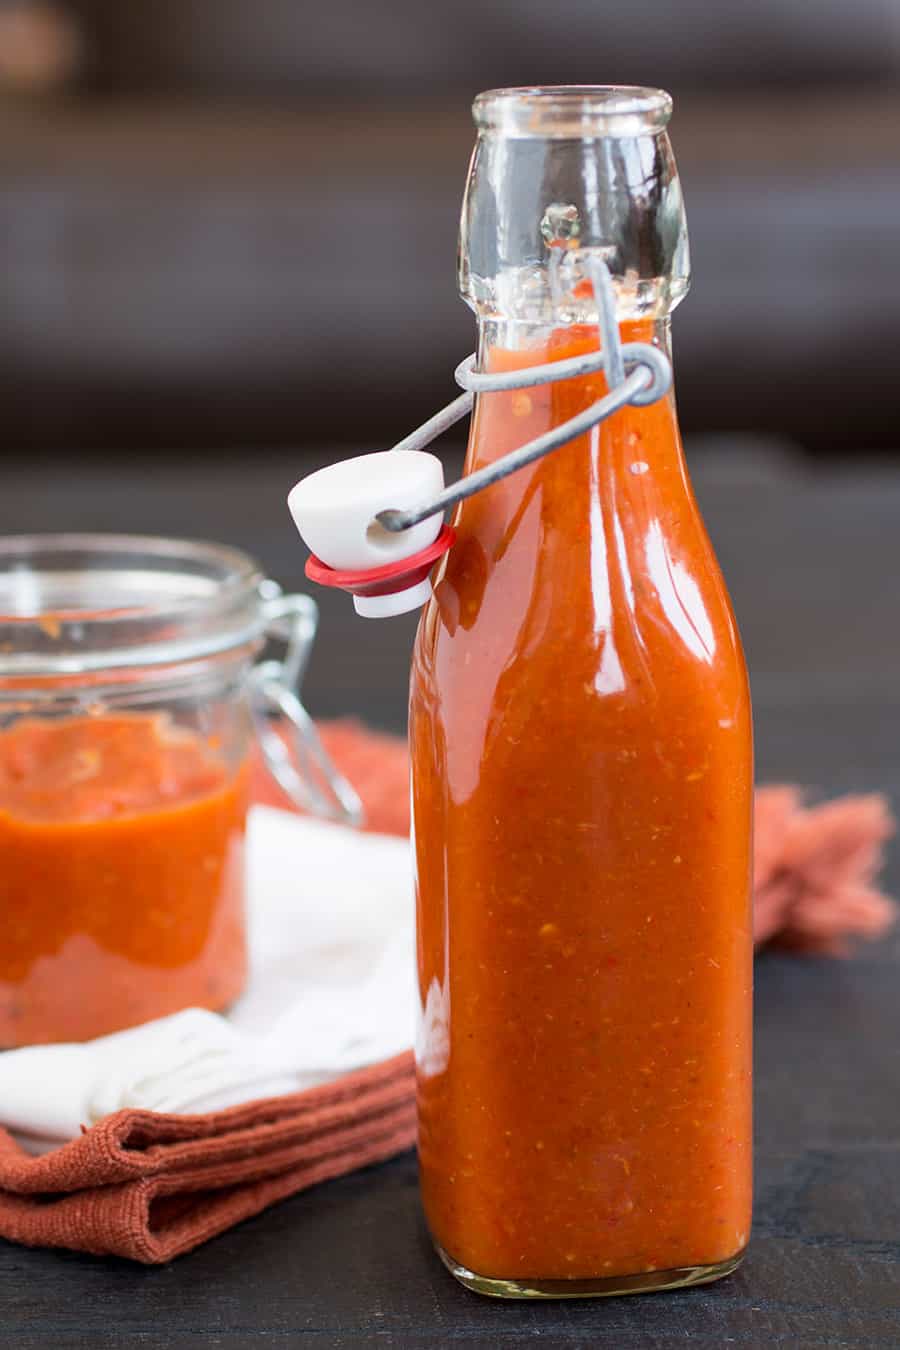 Roasted Red Jalapeno Pepper Hot Sauce Recipe